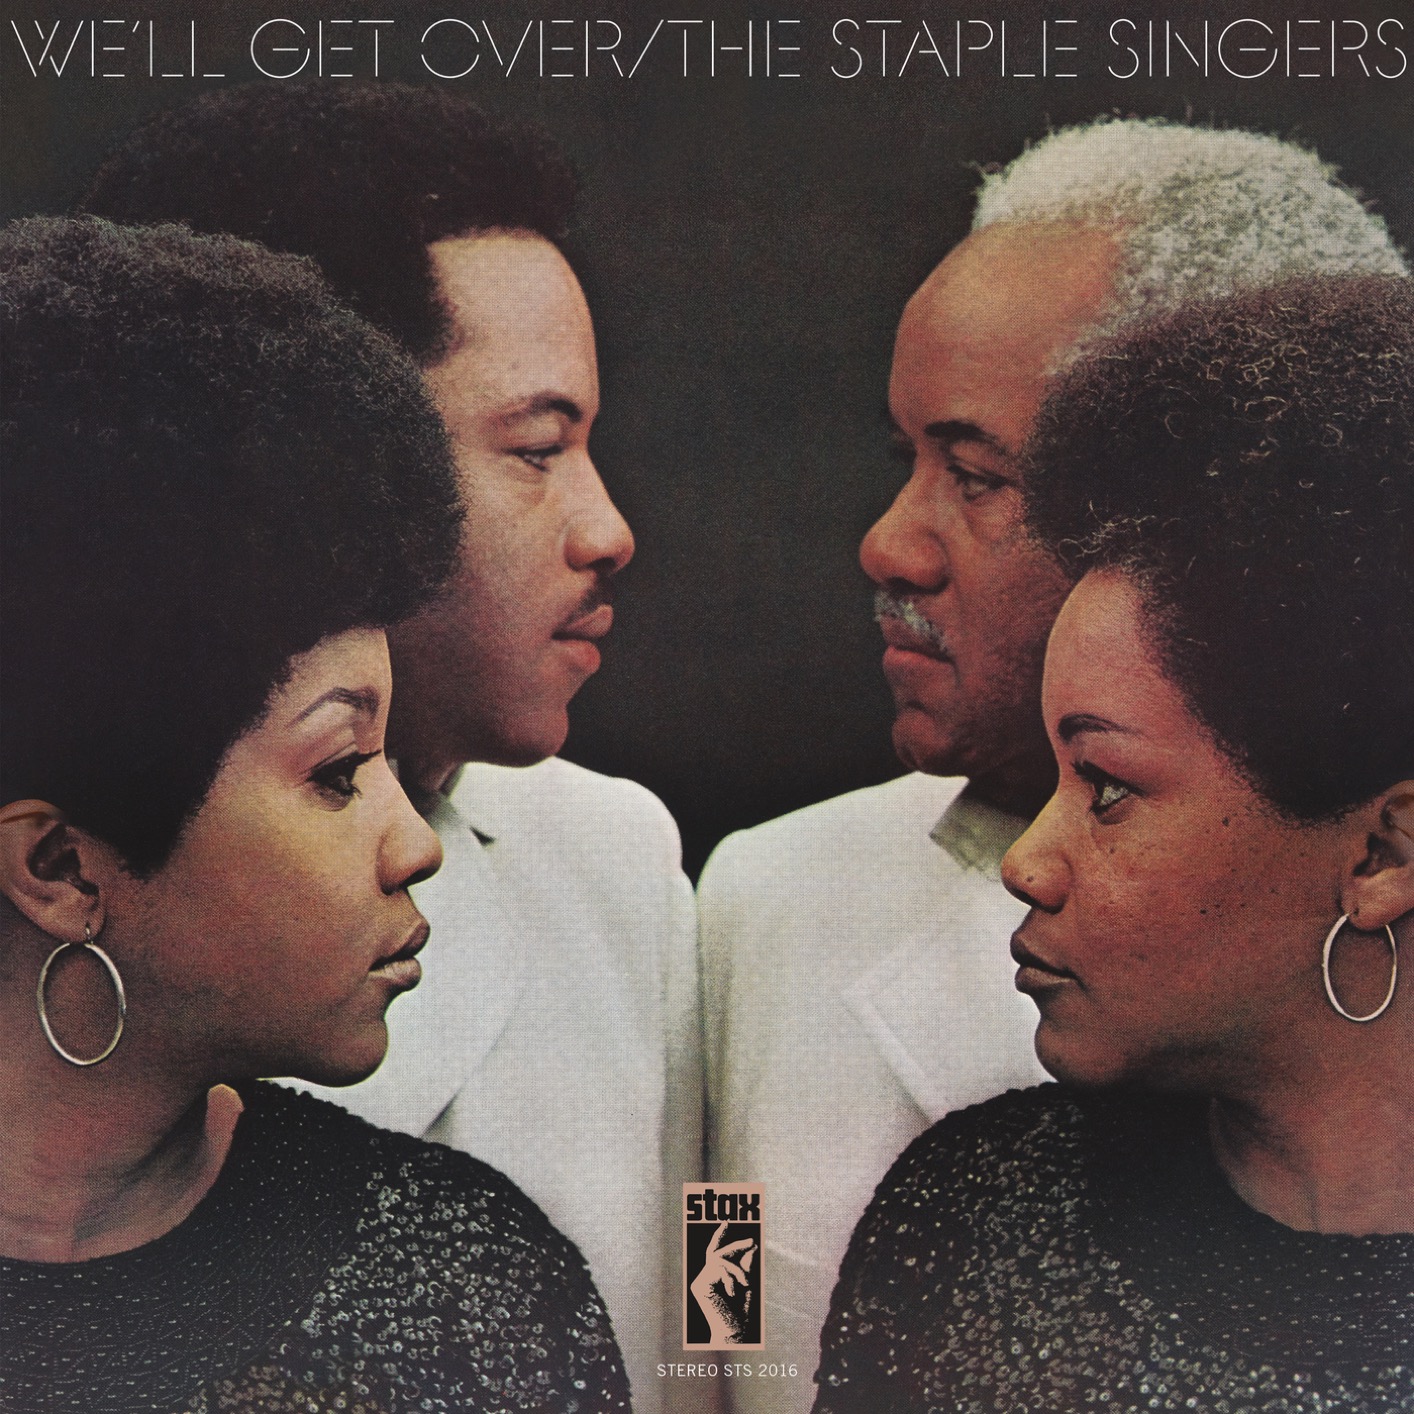 The Staple Singers - We’ll Get Over (Remastered) (1969/2019) [FLAC 24bit/192kHz]